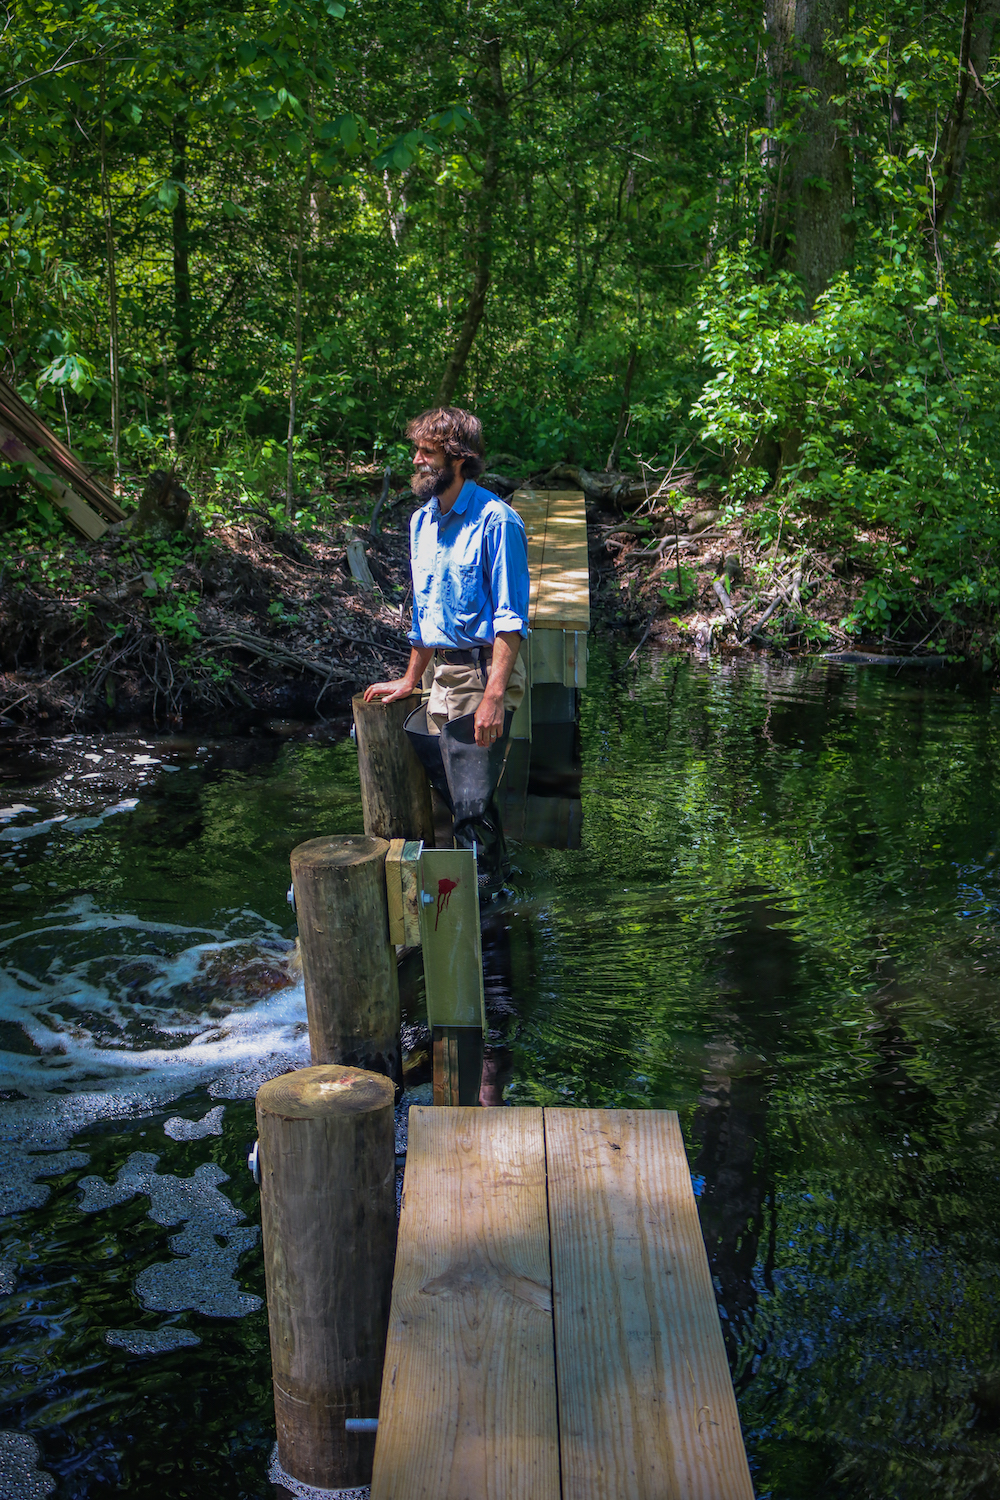 Eric Soderholm stands on a wooden structure above a creek. A forested area sits in the background.